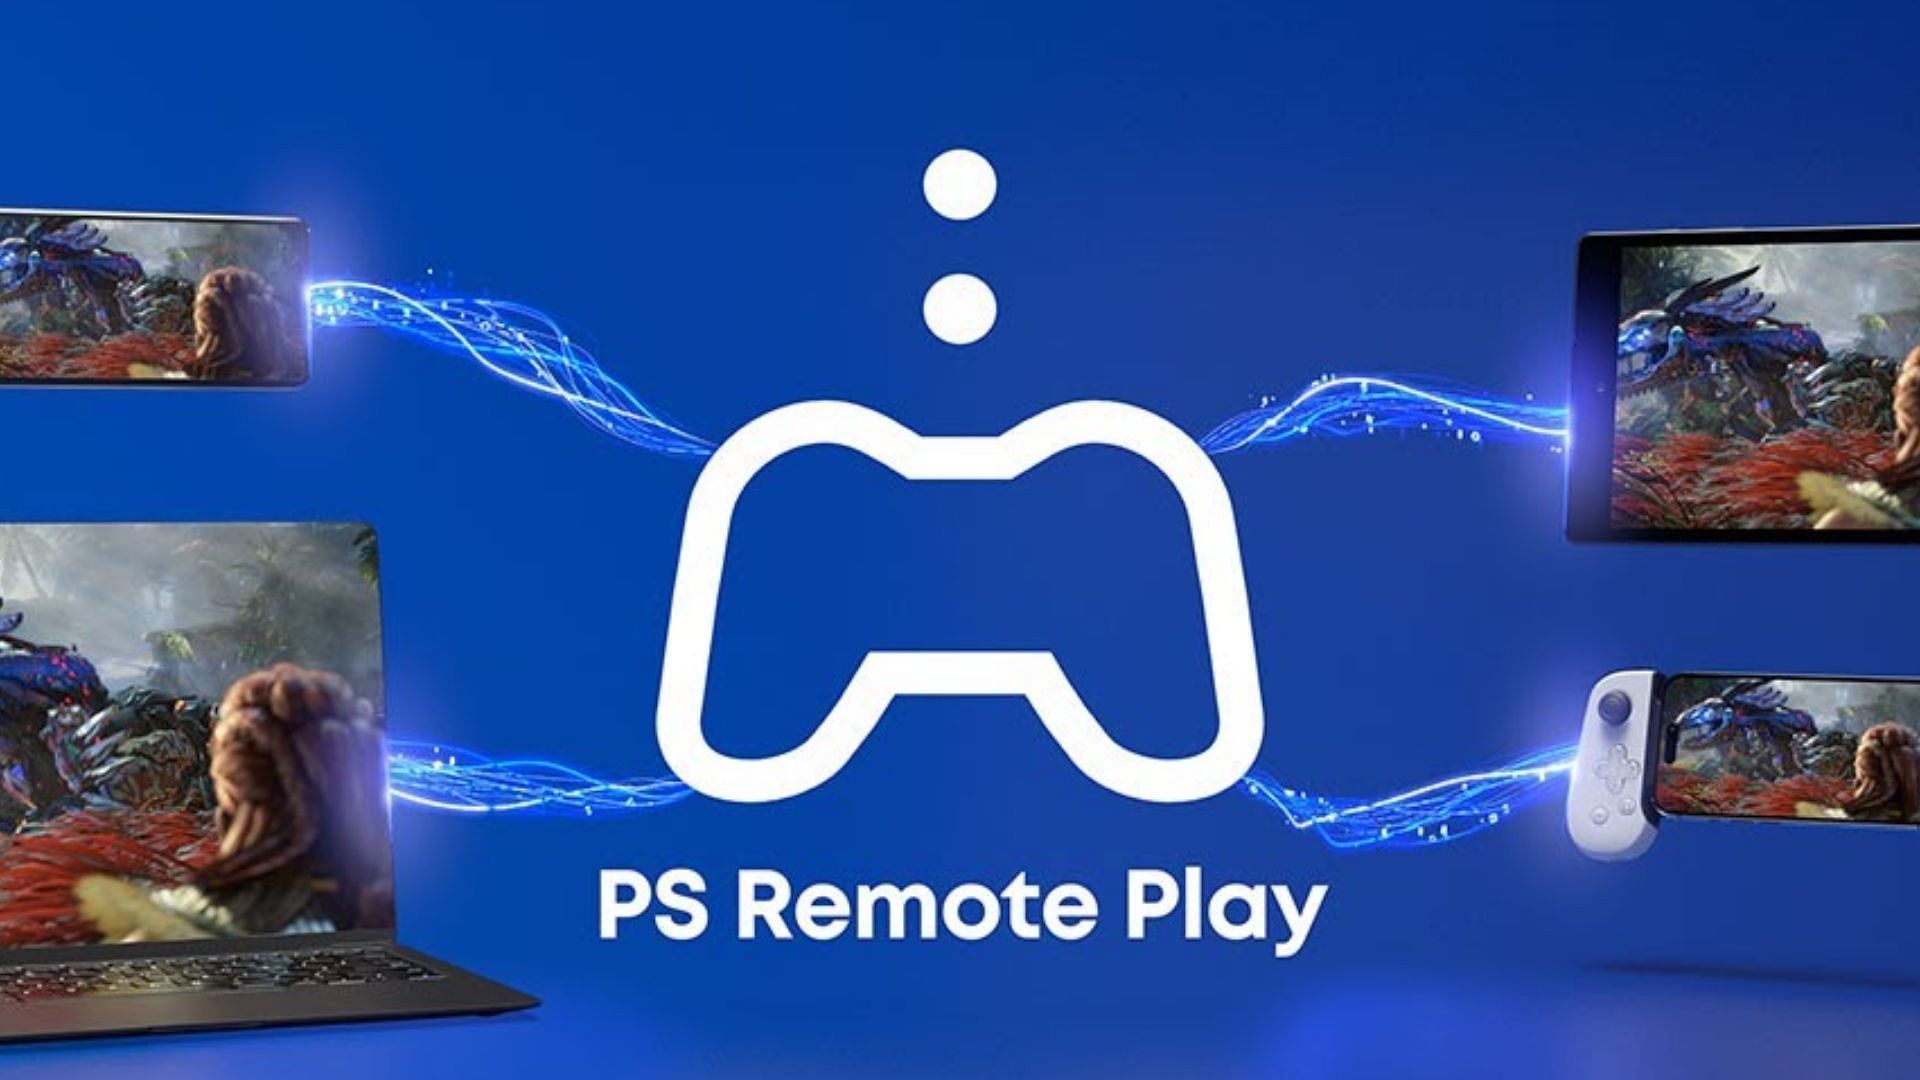 PS5 Remote Play lets gamers play Final Fantasy 16 from a PC (Image via Sony)